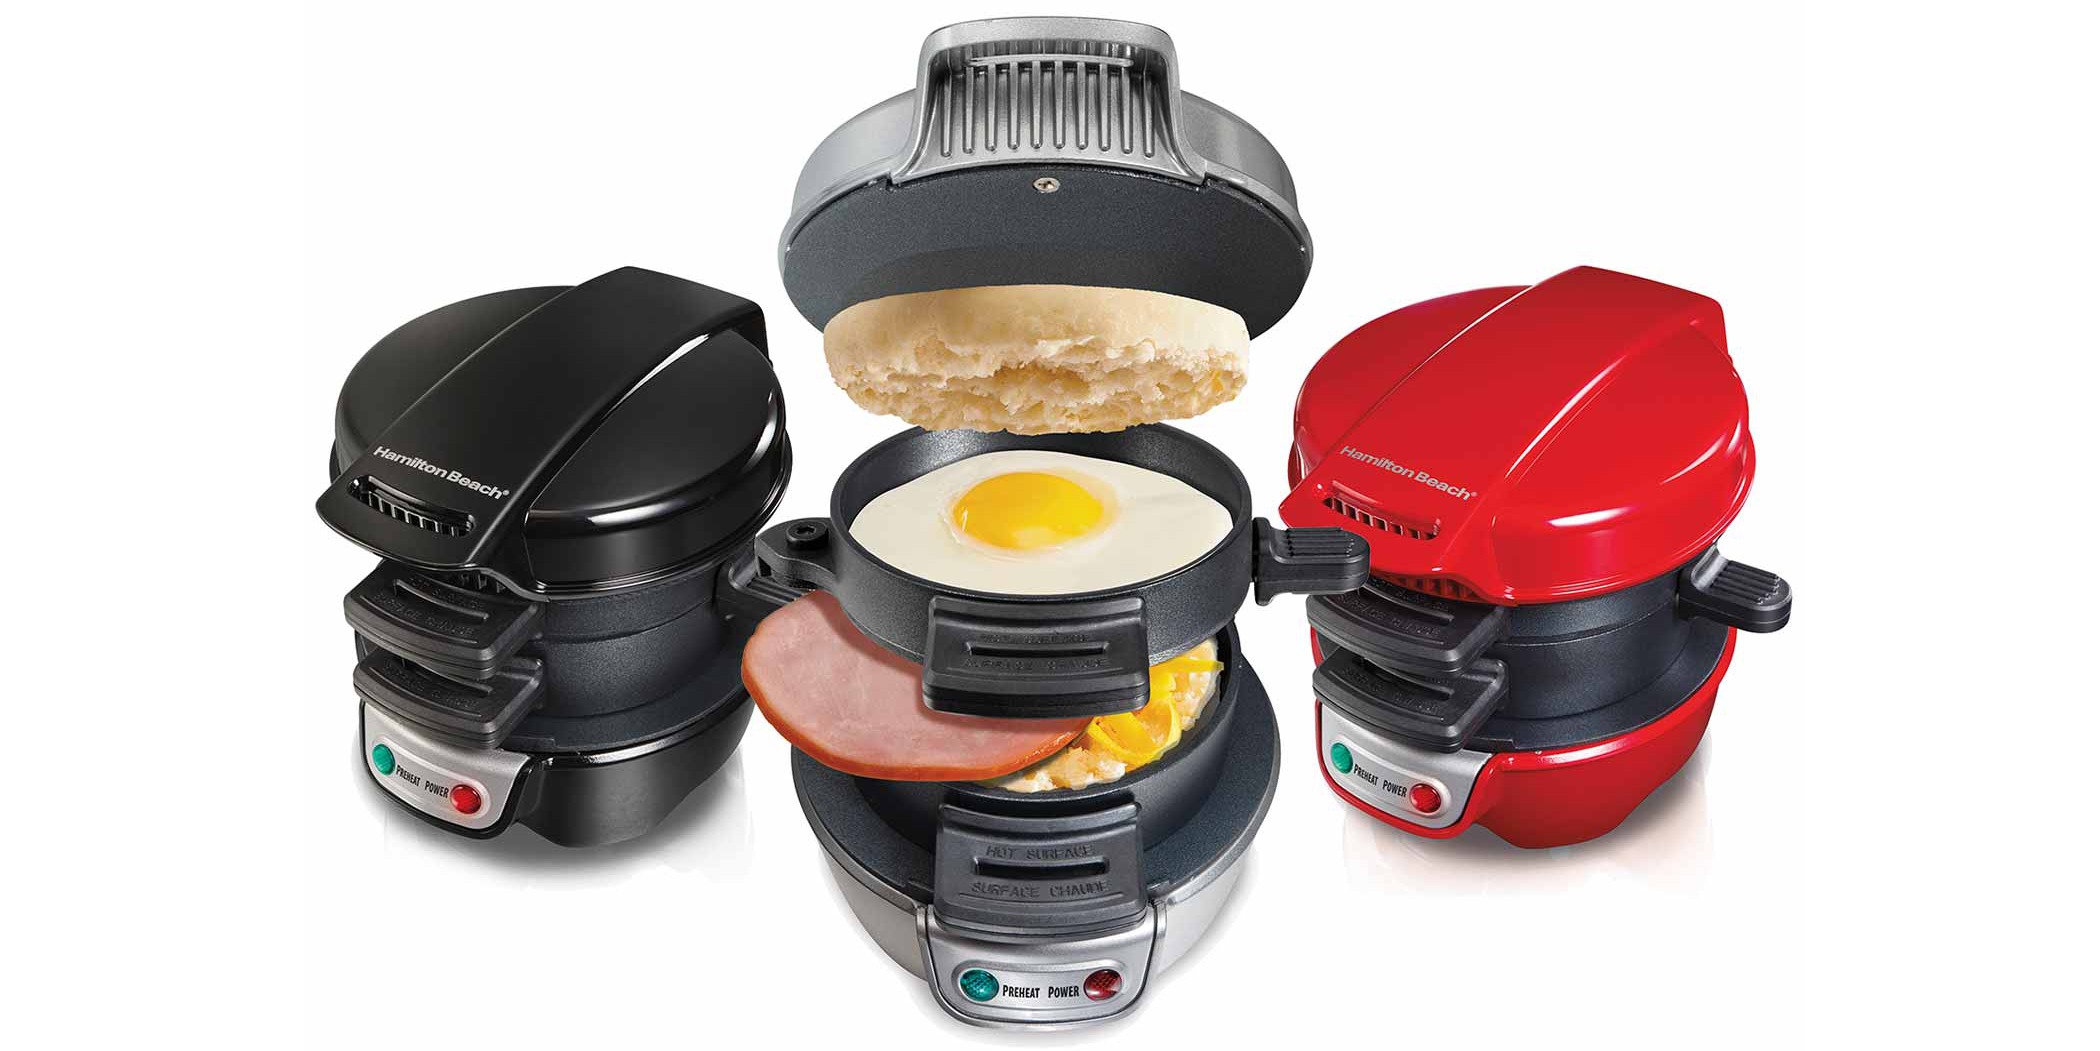 https://9to5toys.com/wp-content/uploads/sites/5/2015/08/hamilton-beach-breakfast-electric-sandwich-maker-in-black-25477-sale.png